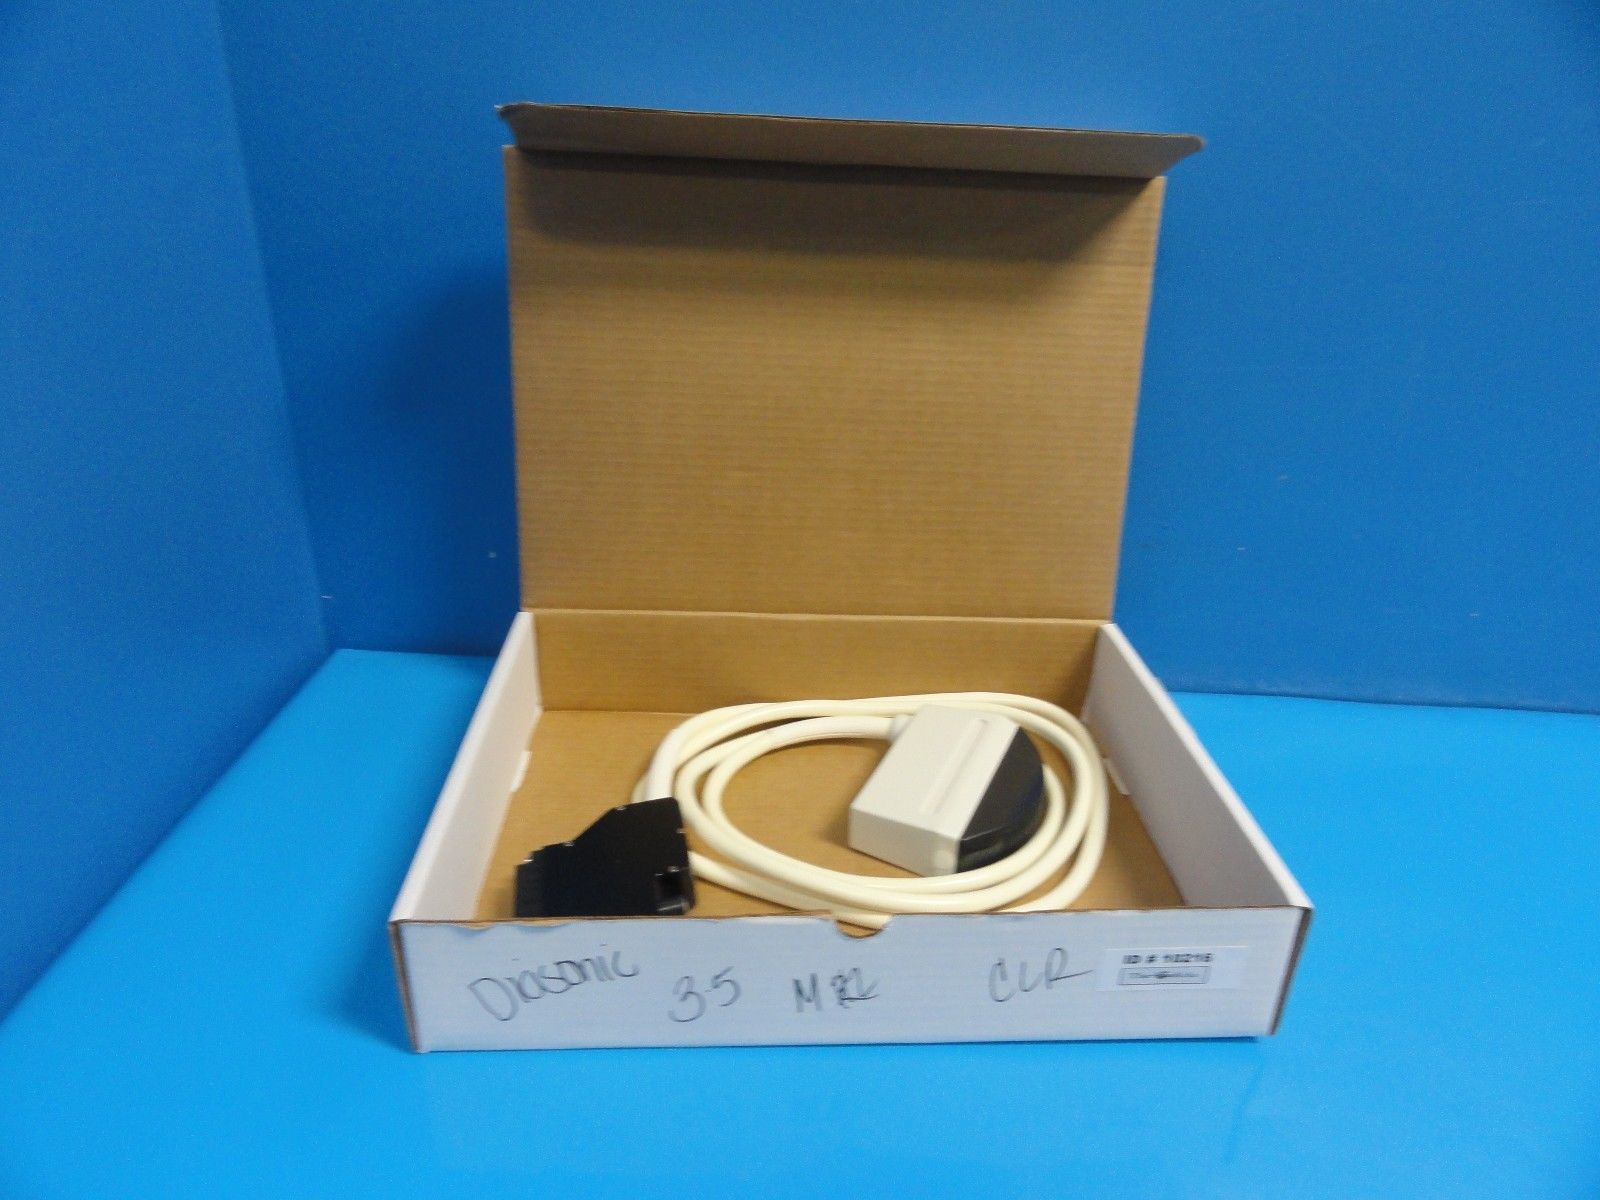 GE Diasonics 3.5 MHz P/N 100-01984-00 Slightly Curved Linear Array Probe (10216) DIAGNOSTIC ULTRASOUND MACHINES FOR SALE